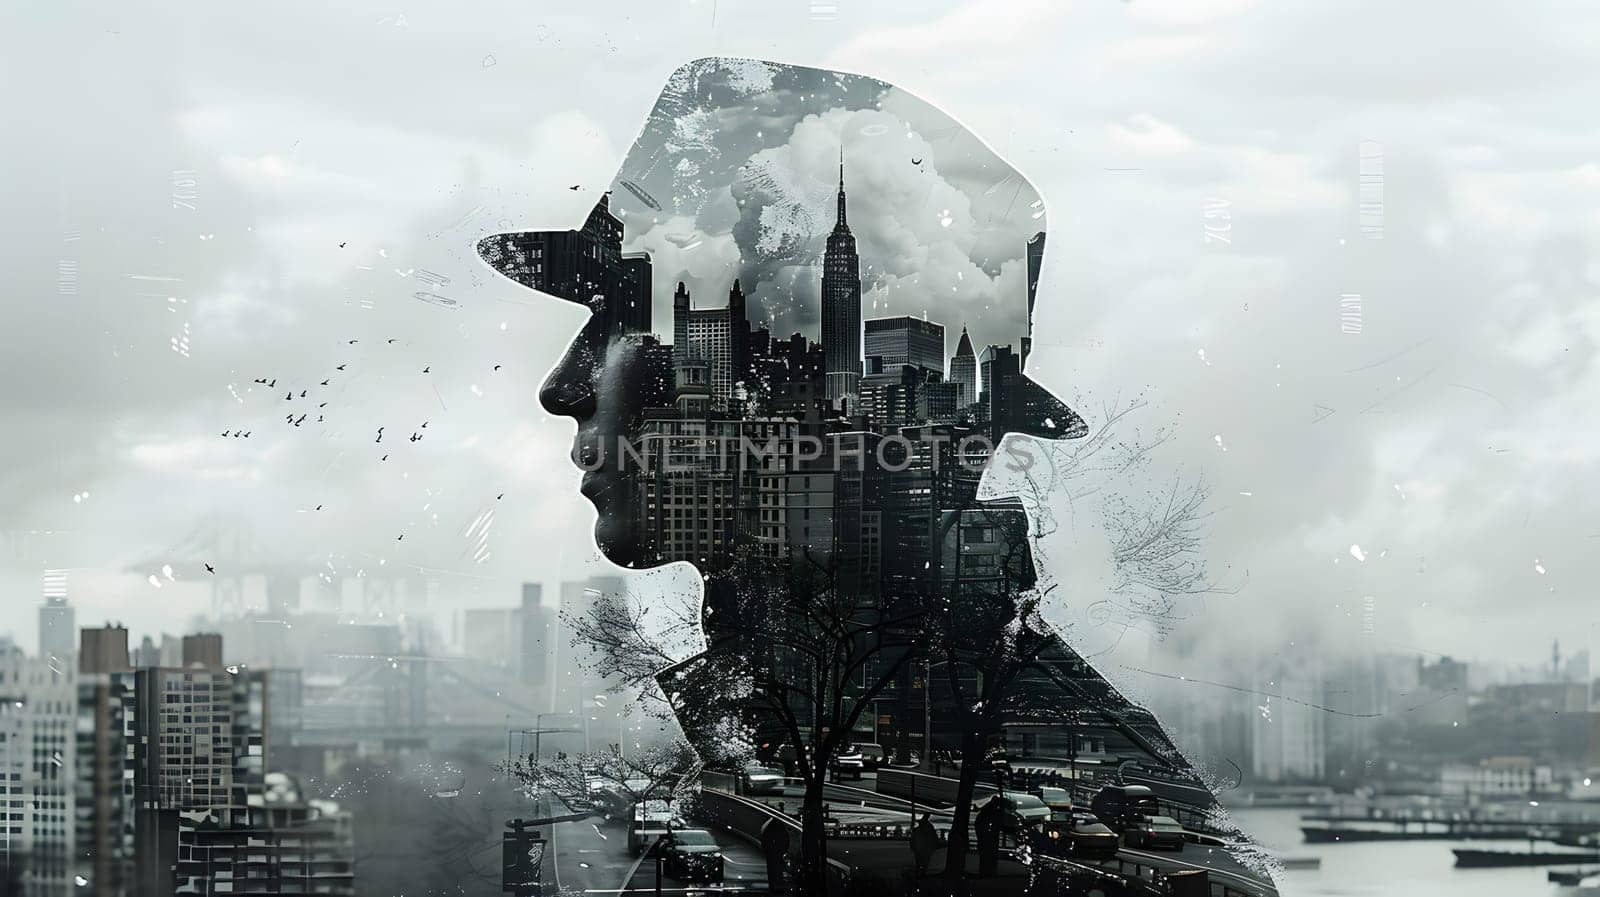 Double exposure of man in hat against city skyline by Nadtochiy